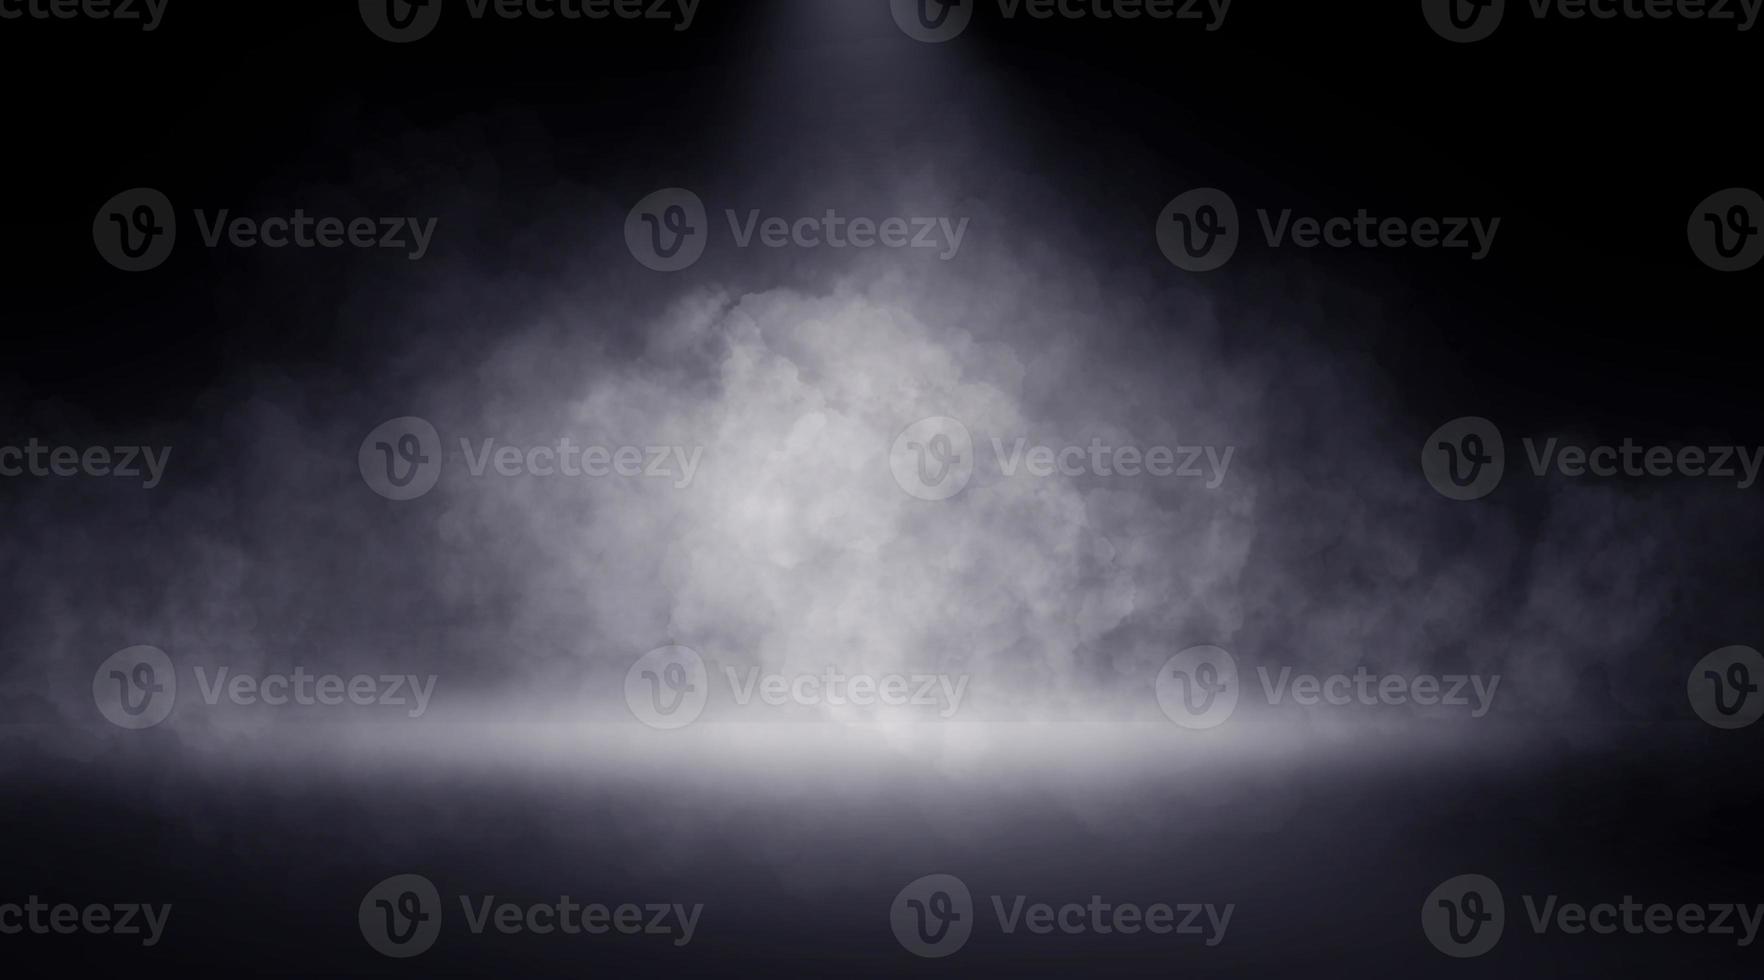 Abstract fog and spotlight background for mystic and horror theme. Blurry smoke and mist texture for photo effect